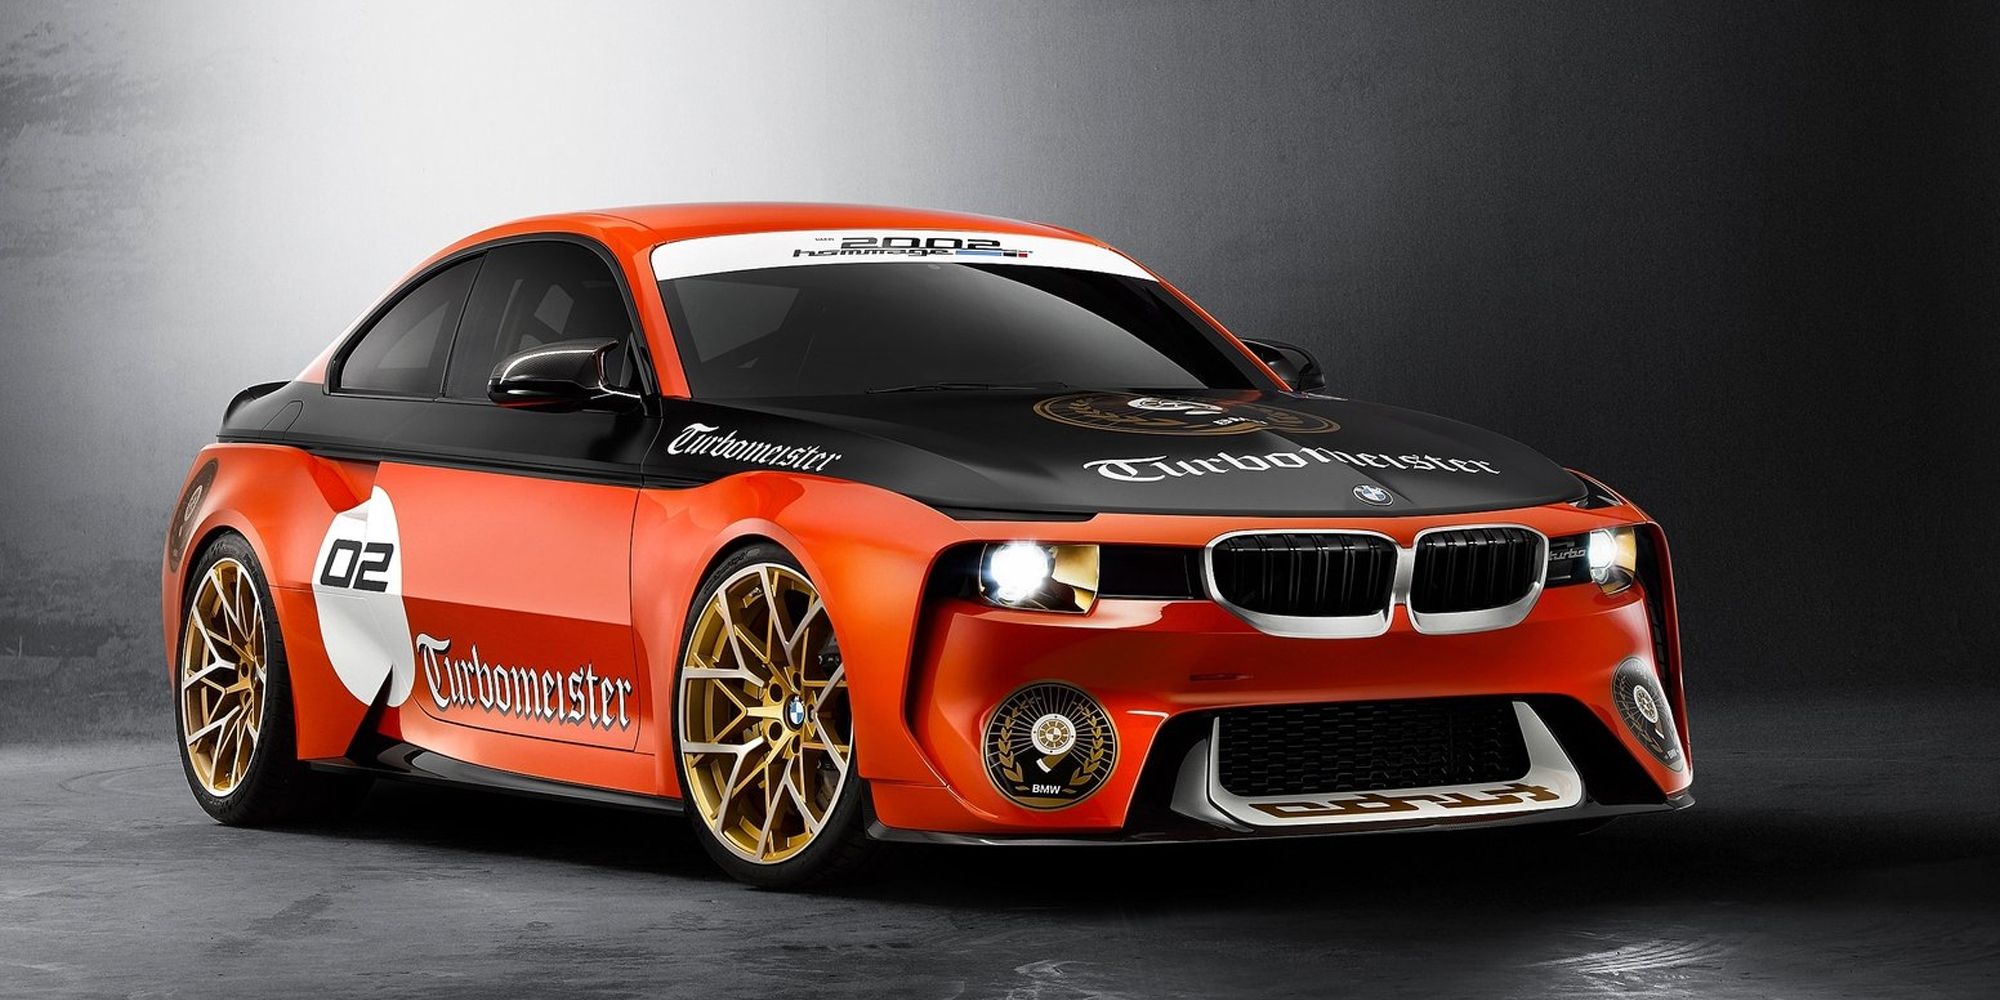 Front 3/4 view of the 2002 Hommage, Jagermeister livery